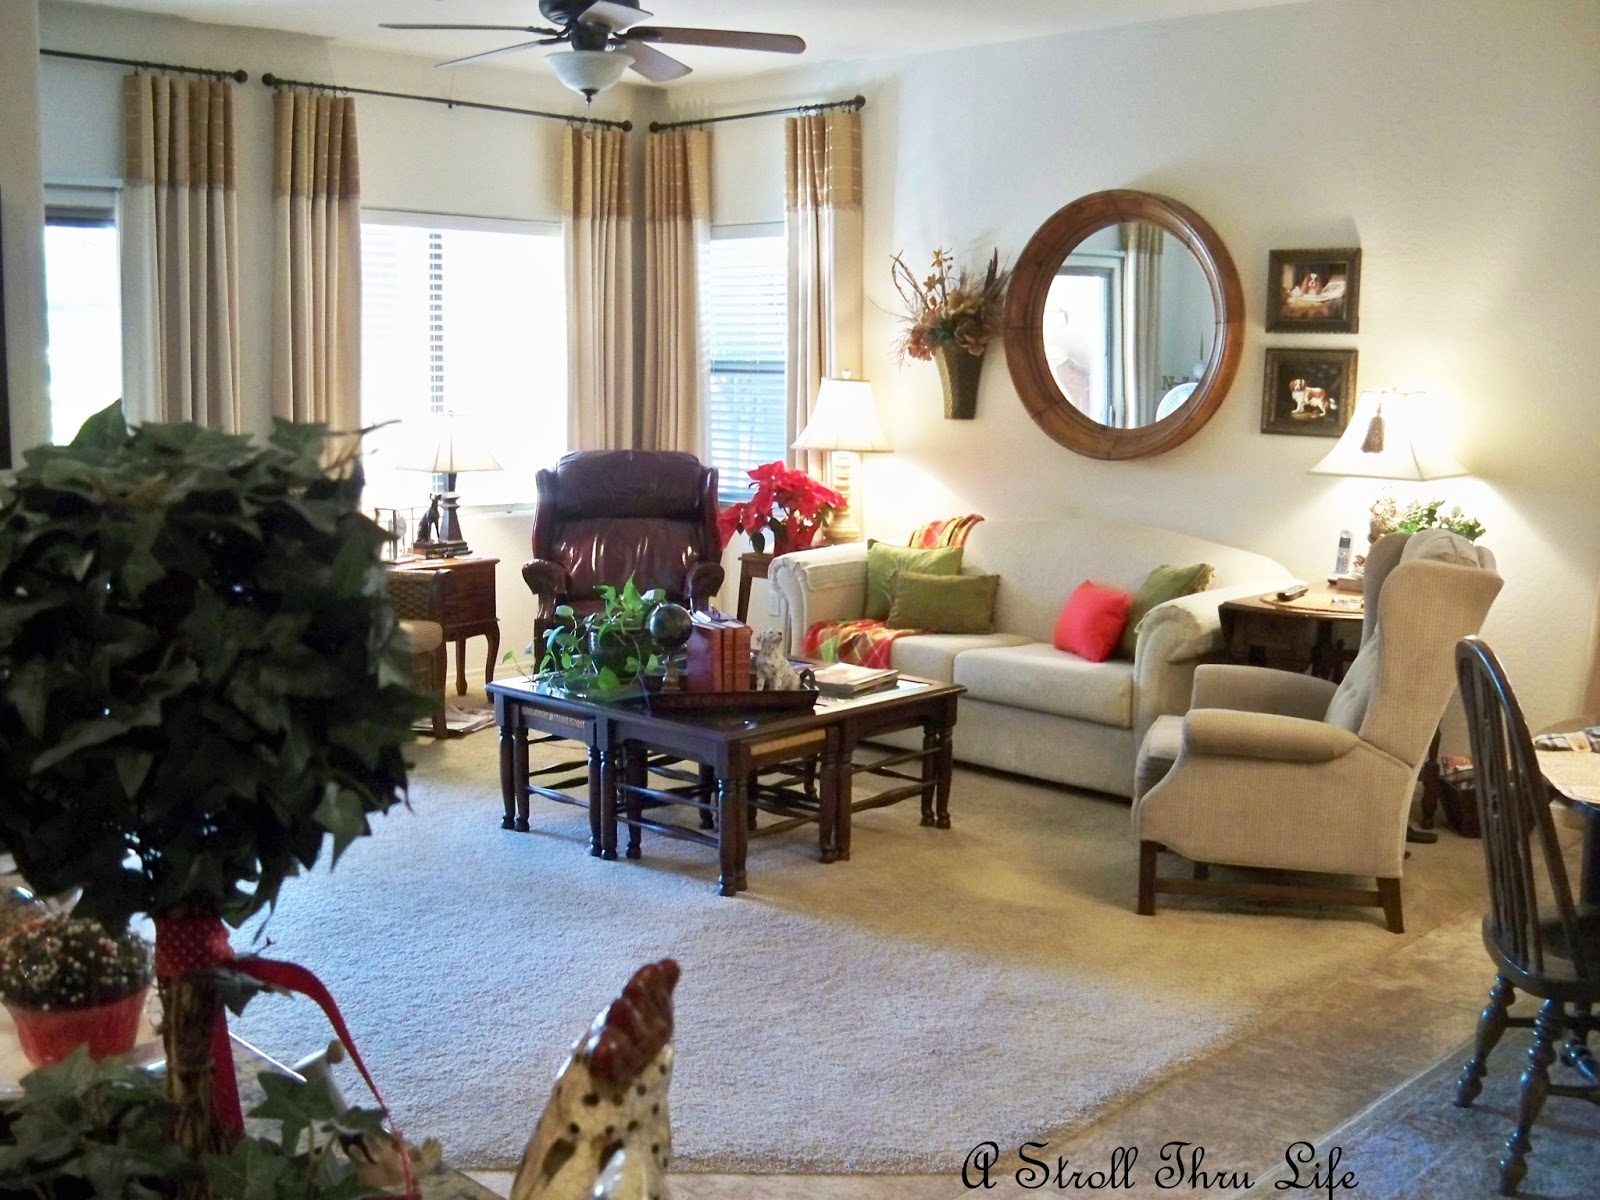 Family Room Done - After Christmas Decorating